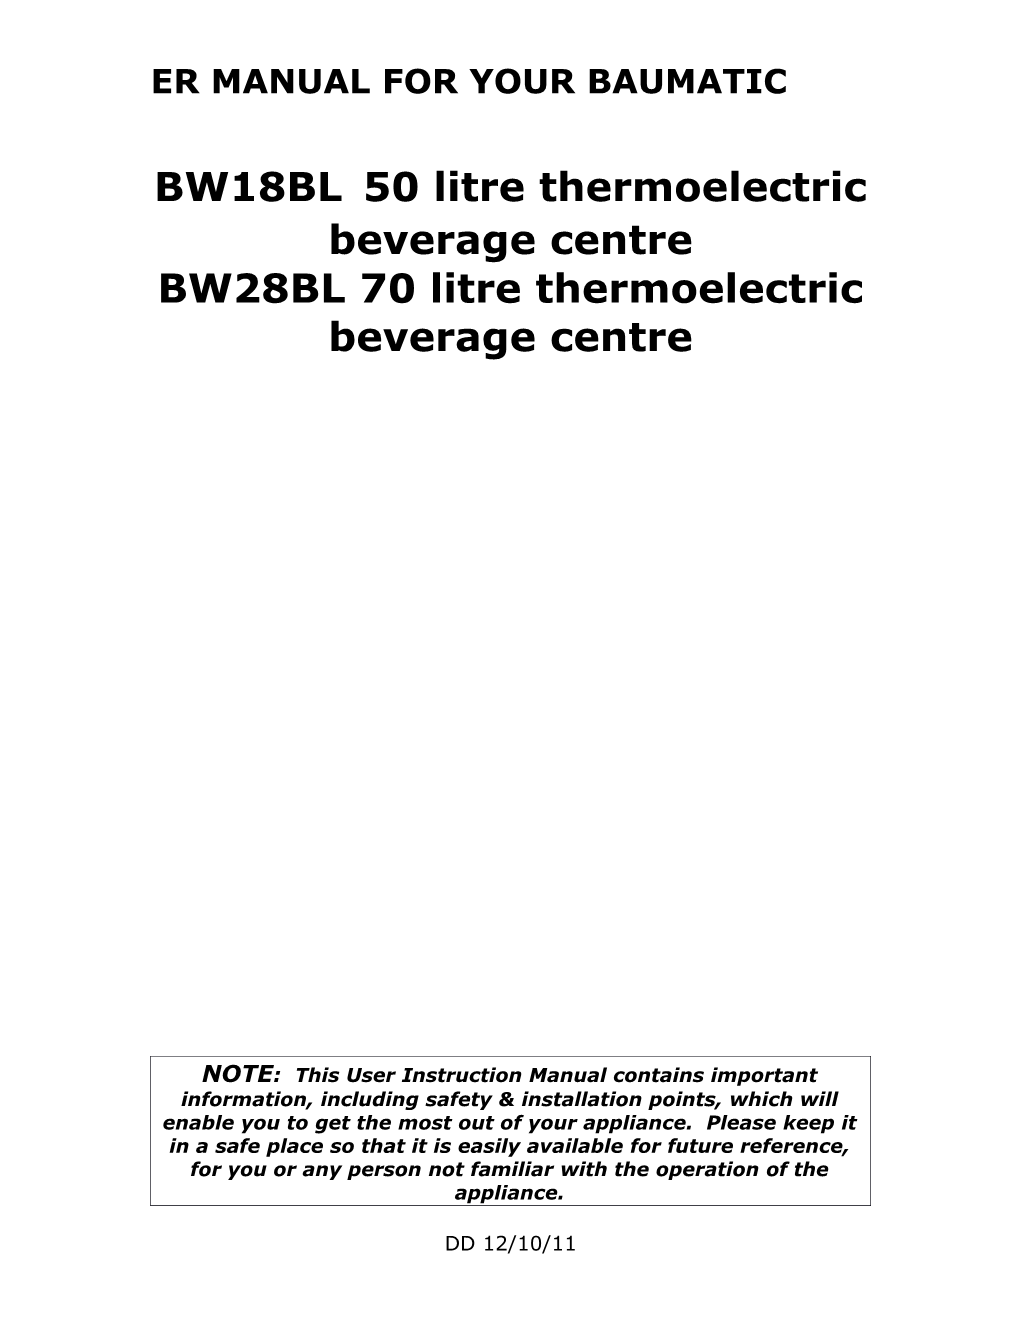 BW18BL50 Litre Thermoelectric Beverage Centre